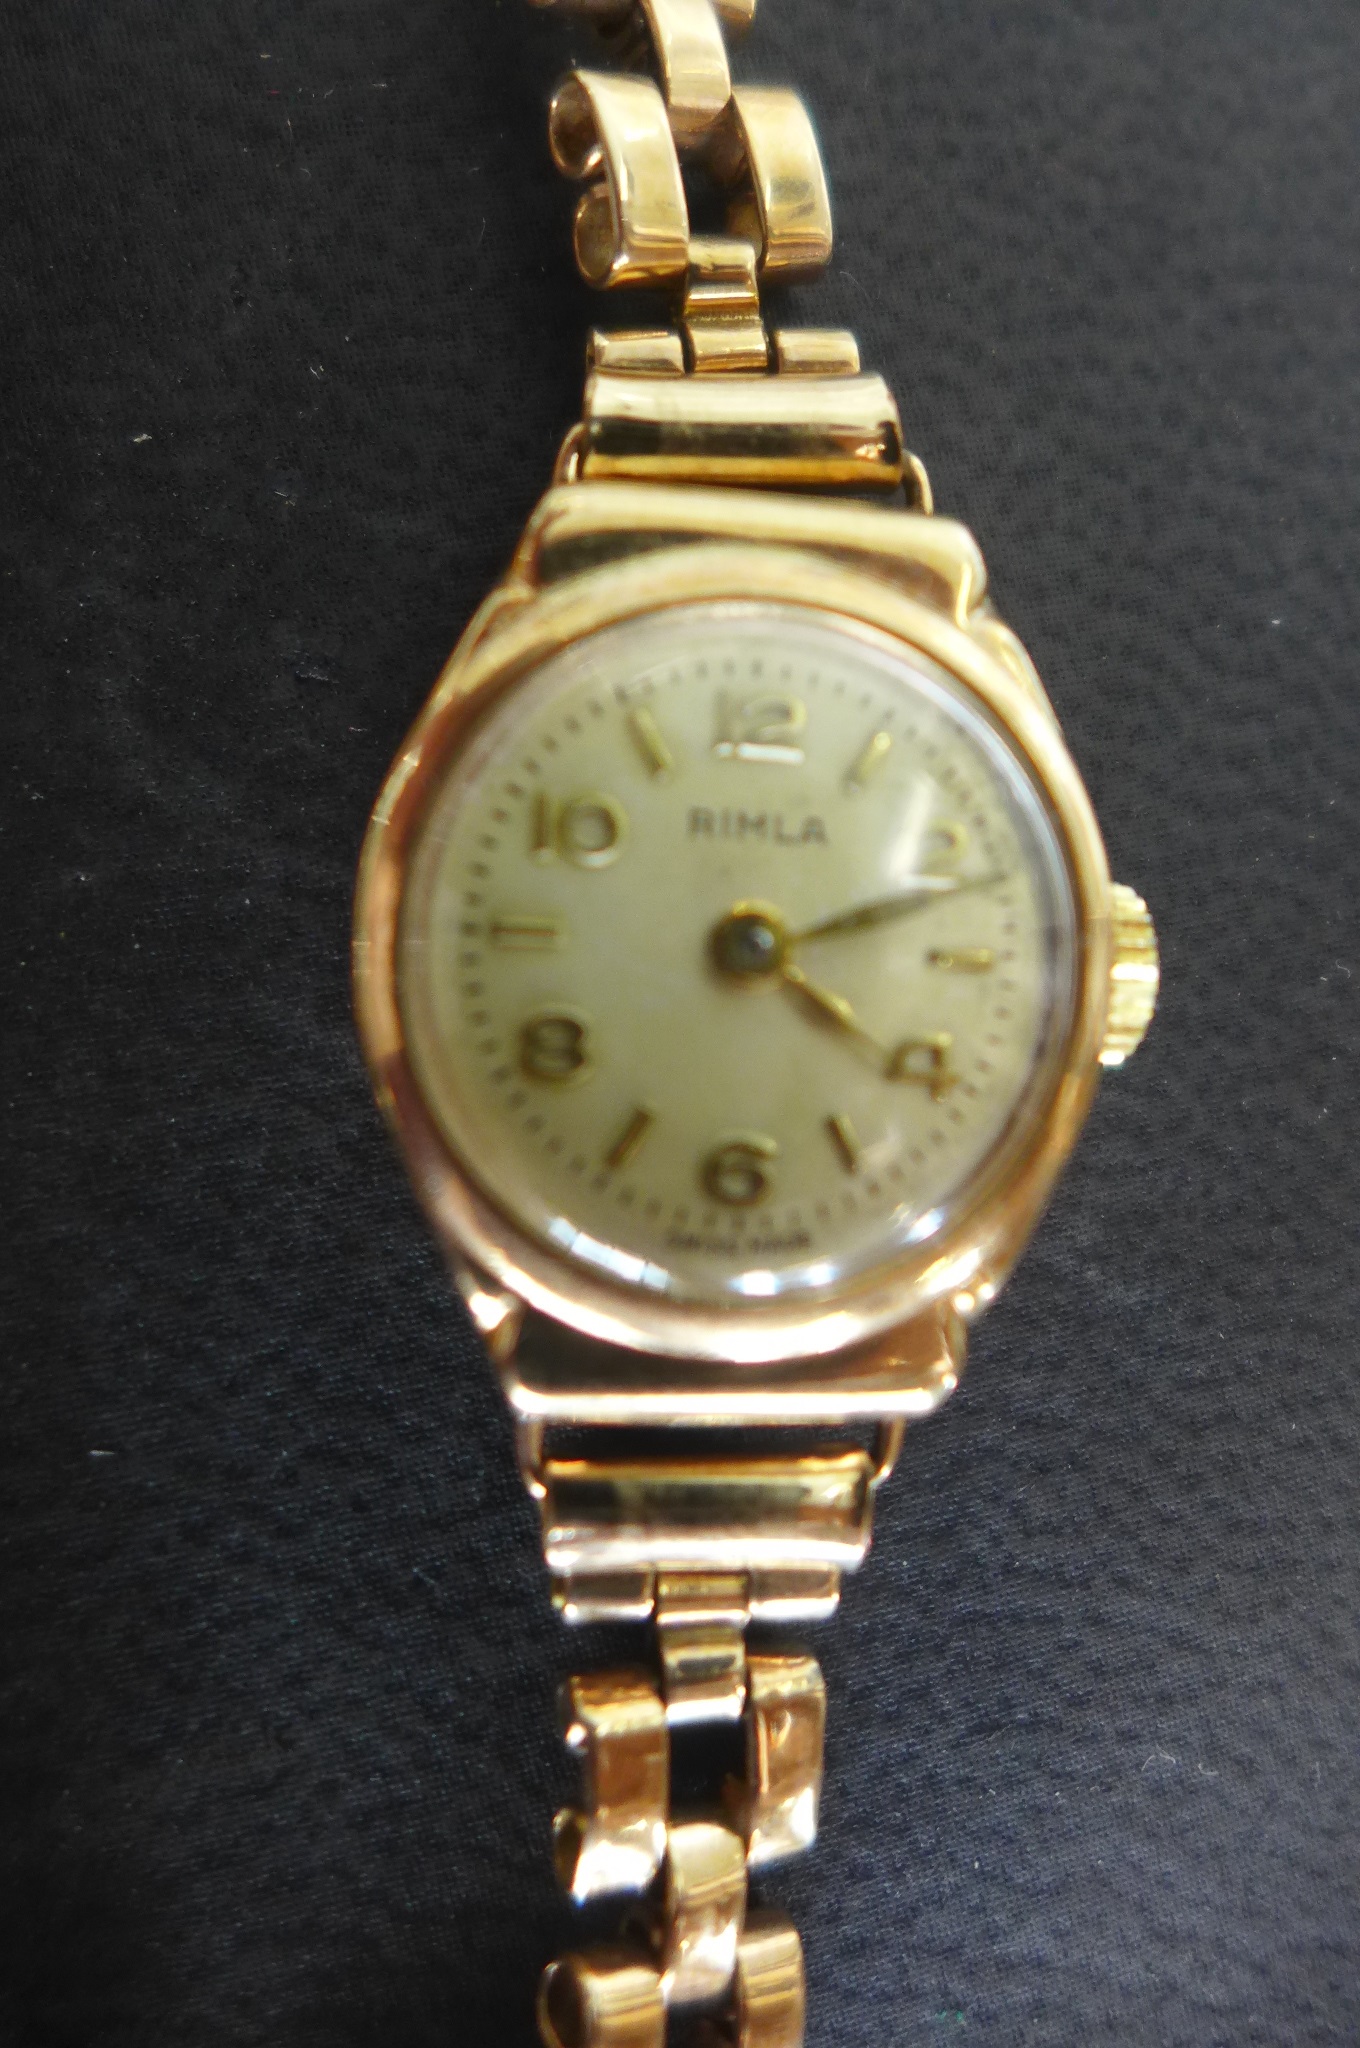 A ladies 9ct gold Rimla wristwatch and bracelet, gold weight 12 grams, 15 jewel Swiss movement,